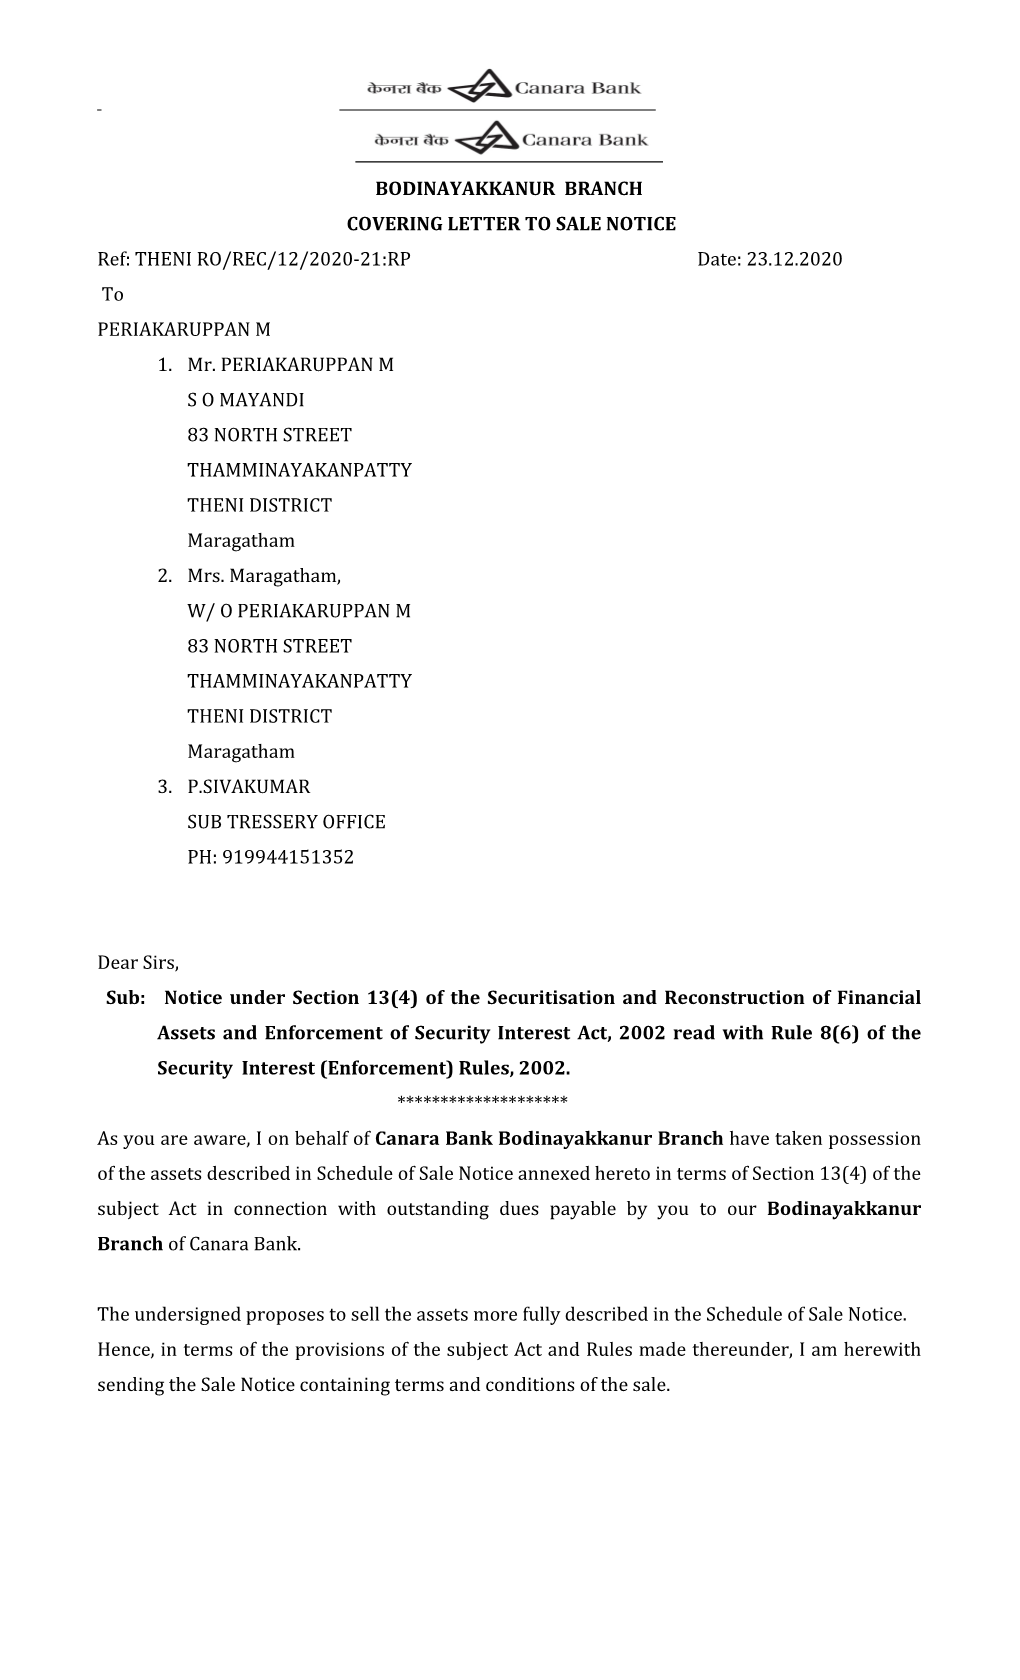 BODINAYAKKANUR BRANCH COVERING LETTER to SALE NOTICE Ref: THENI RO/REC/12/2020-21:RP Date: 23.12.2020 to PERIAKARUPPAN M 1